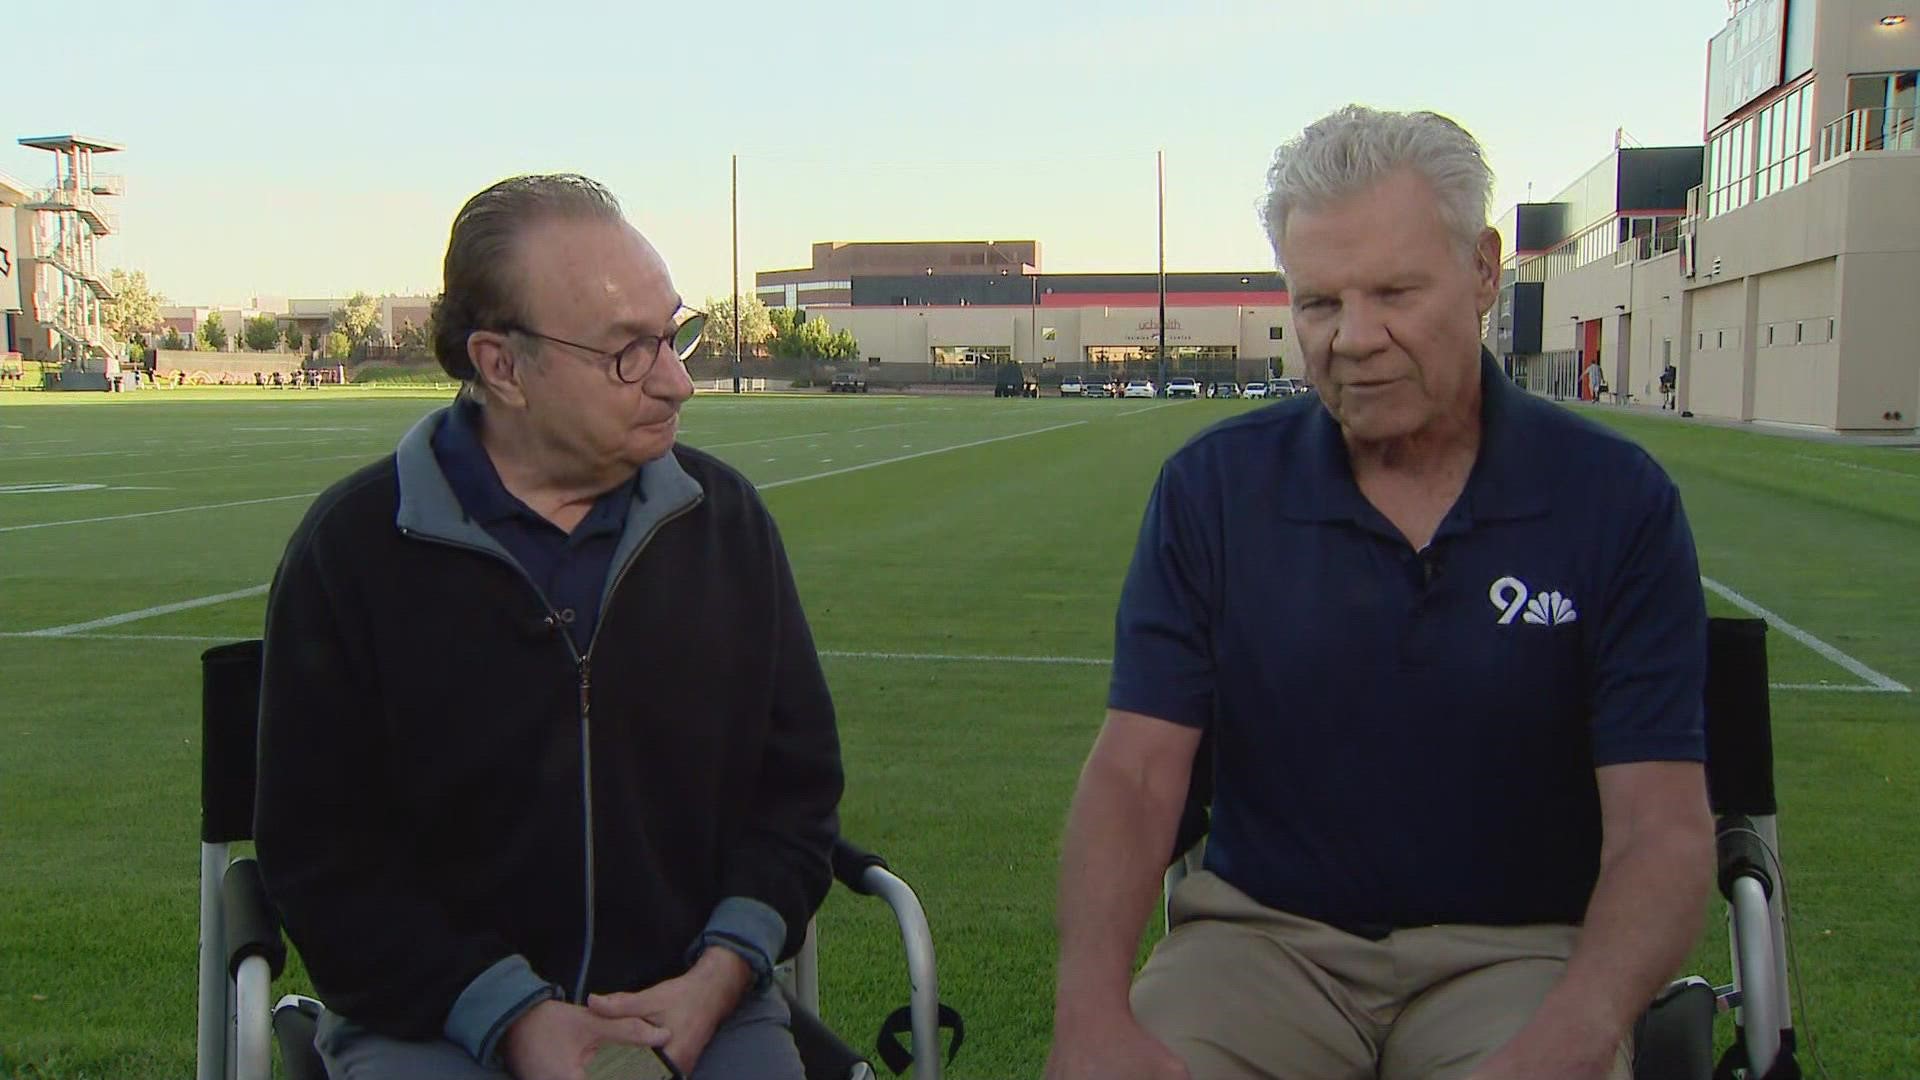 How good could the Denver Broncos be in 2022? 9NEWS Broncos Insider Mike Klis breaks down the team at the start of Training Camp.